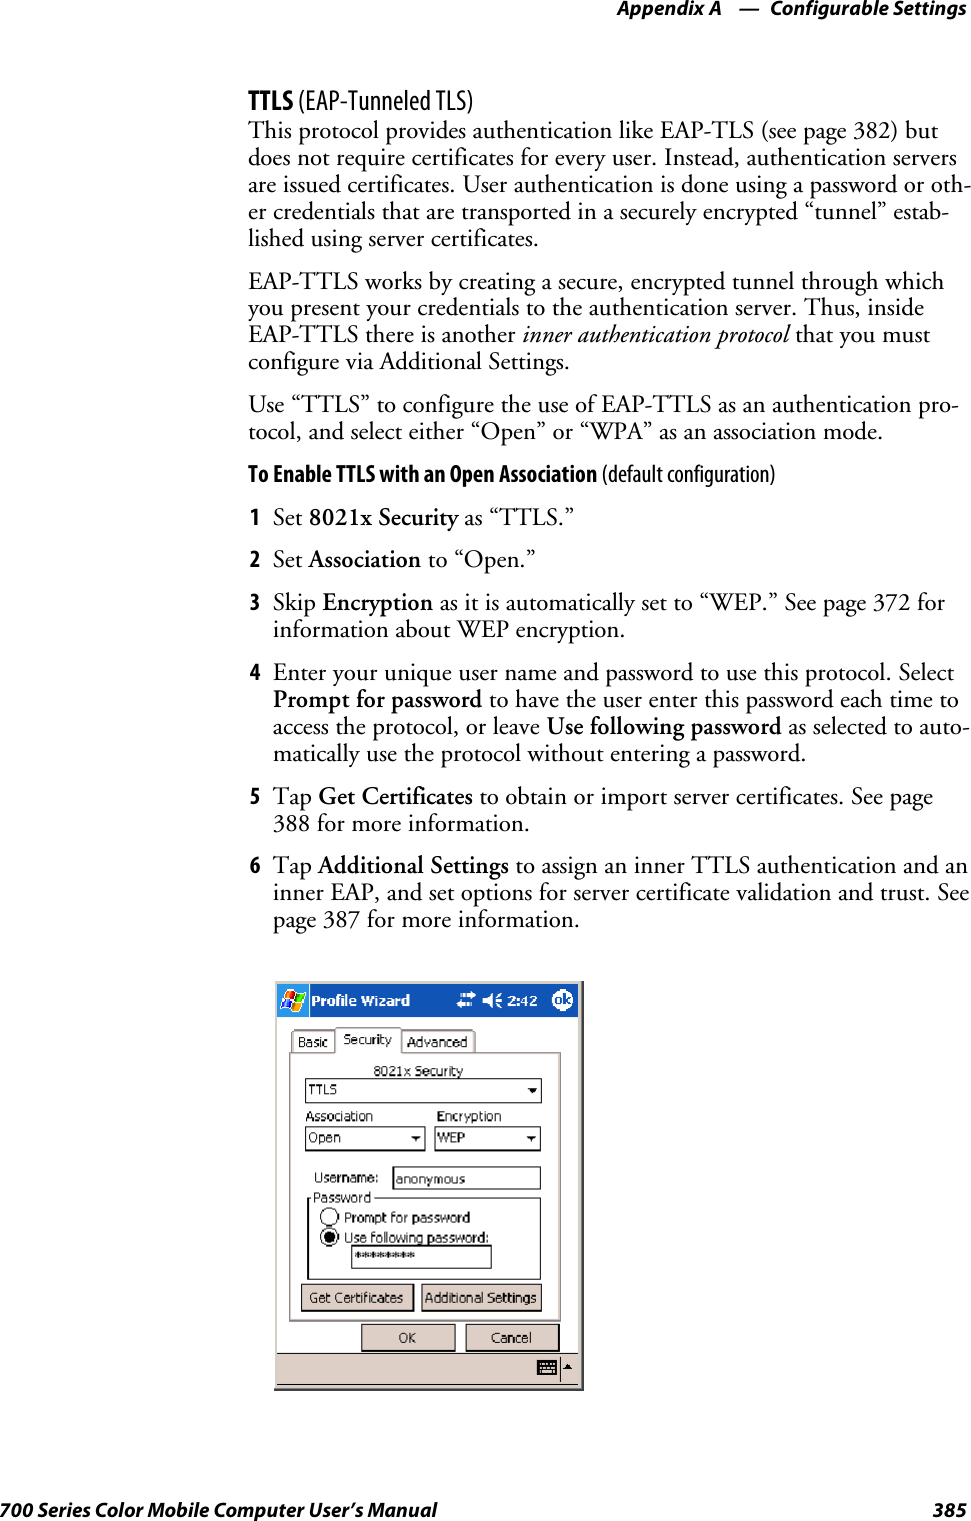 Configurable SettingsAppendix —A385700 Series Color Mobile Computer User’s ManualTTLS (EAP-Tunneled TLS)This protocol provides authentication like EAP-TLS (see page 382) butdoes not require certificates for every user. Instead, authentication serversare issued certificates. User authentication is done using a password or oth-er credentials that are transported in a securely encrypted “tunnel” estab-lished using server certificates.EAP-TTLS works by creating a secure, encrypted tunnel through whichyou present your credentials to the authentication server. Thus, insideEAP-TTLS there is another inner authentication protocol that you mustconfigure via Additional Settings.Use“TTLS”toconfiguretheuseofEAP-TTLSasanauthenticationpro-tocol, and select either “Open” or “WPA” as an association mode.ToEnableTTLSwithanOpenAssociation(default configuration)1Set 8021x Security as “TTLS.”2Set Association to “Open.”3Skip Encryption as it is automatically set to “WEP.” See page 372 forinformation about WEP encryption.4Enter your unique user name and password to use this protocol. SelectPrompt for password to have the user enter this password each time toaccess the protocol, or leave Use following password as selected to auto-matically use the protocol without entering a password.5Tap Get Certificates to obtain or import server certificates. See page388 for more information.6Tap Additional Settings to assign an inner TTLS authentication and aninner EAP, and set options for server certificate validation and trust. Seepage 387 for more information.